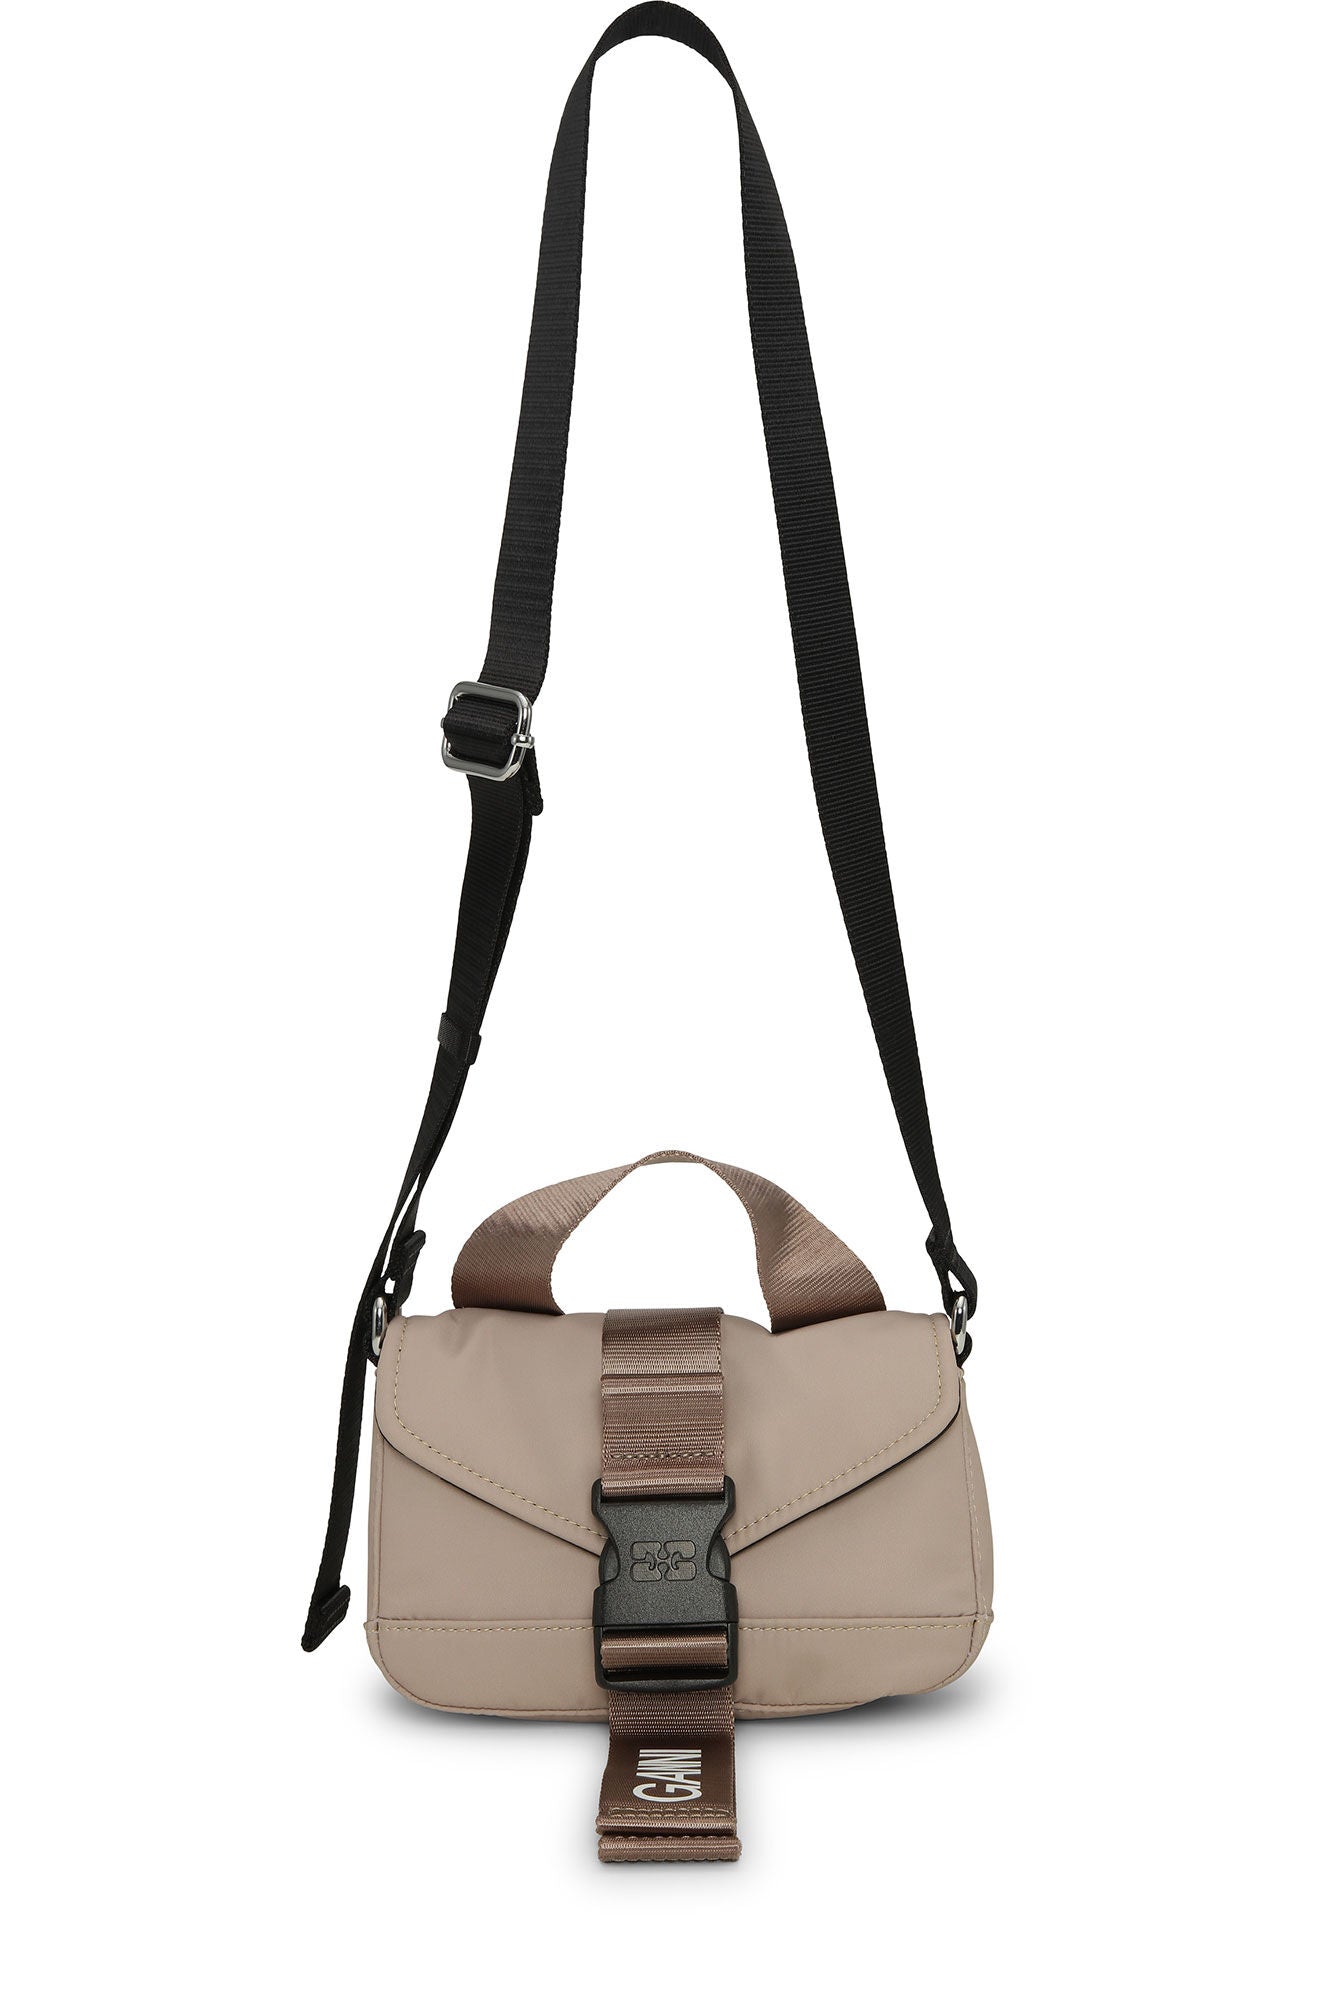 RECYCLED TECH MINI SATCHEL BAG IN OYSTER GRAY - Romi Boutique